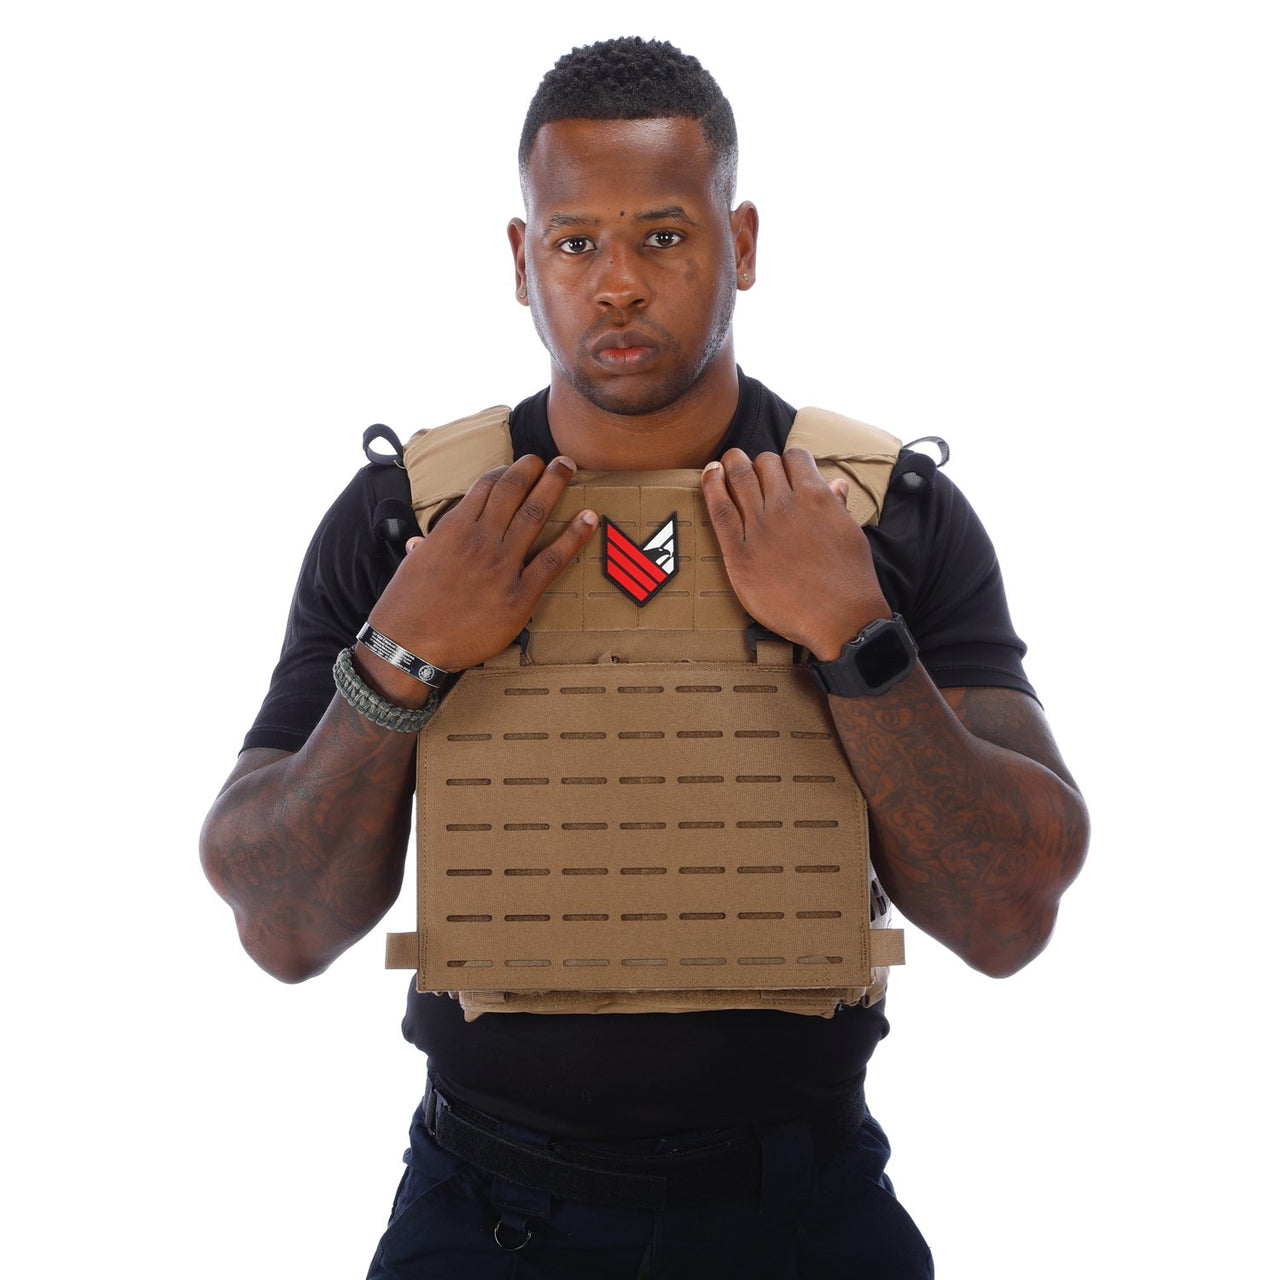 A man wearing a Body Armor Direct Expert Plate Carrier on a white background.